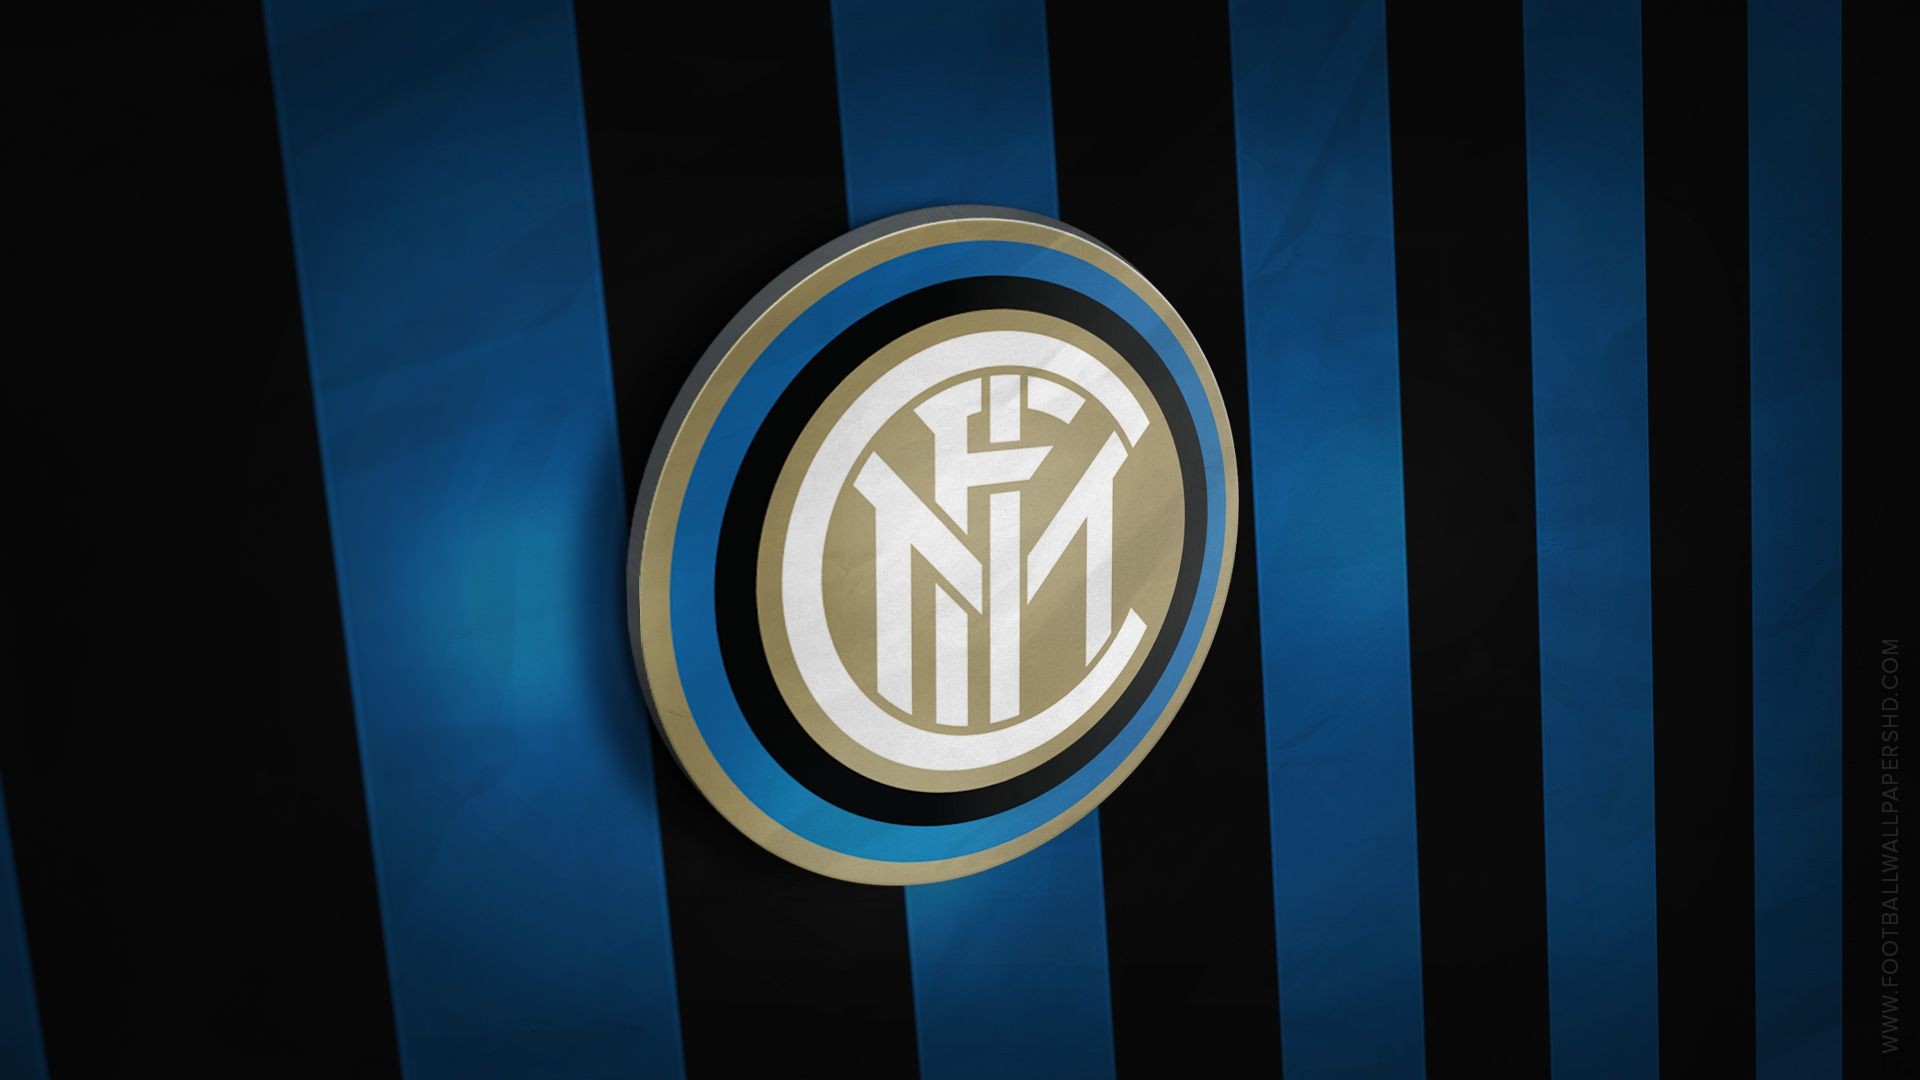 HD Backgrounds Inter Milan with high-resolution 1920x1080 pixel. You can use this wallpaper for your Desktop Computers, Mac Screensavers, Windows Backgrounds, iPhone Wallpapers, Tablet or Android Lock screen and another Mobile device